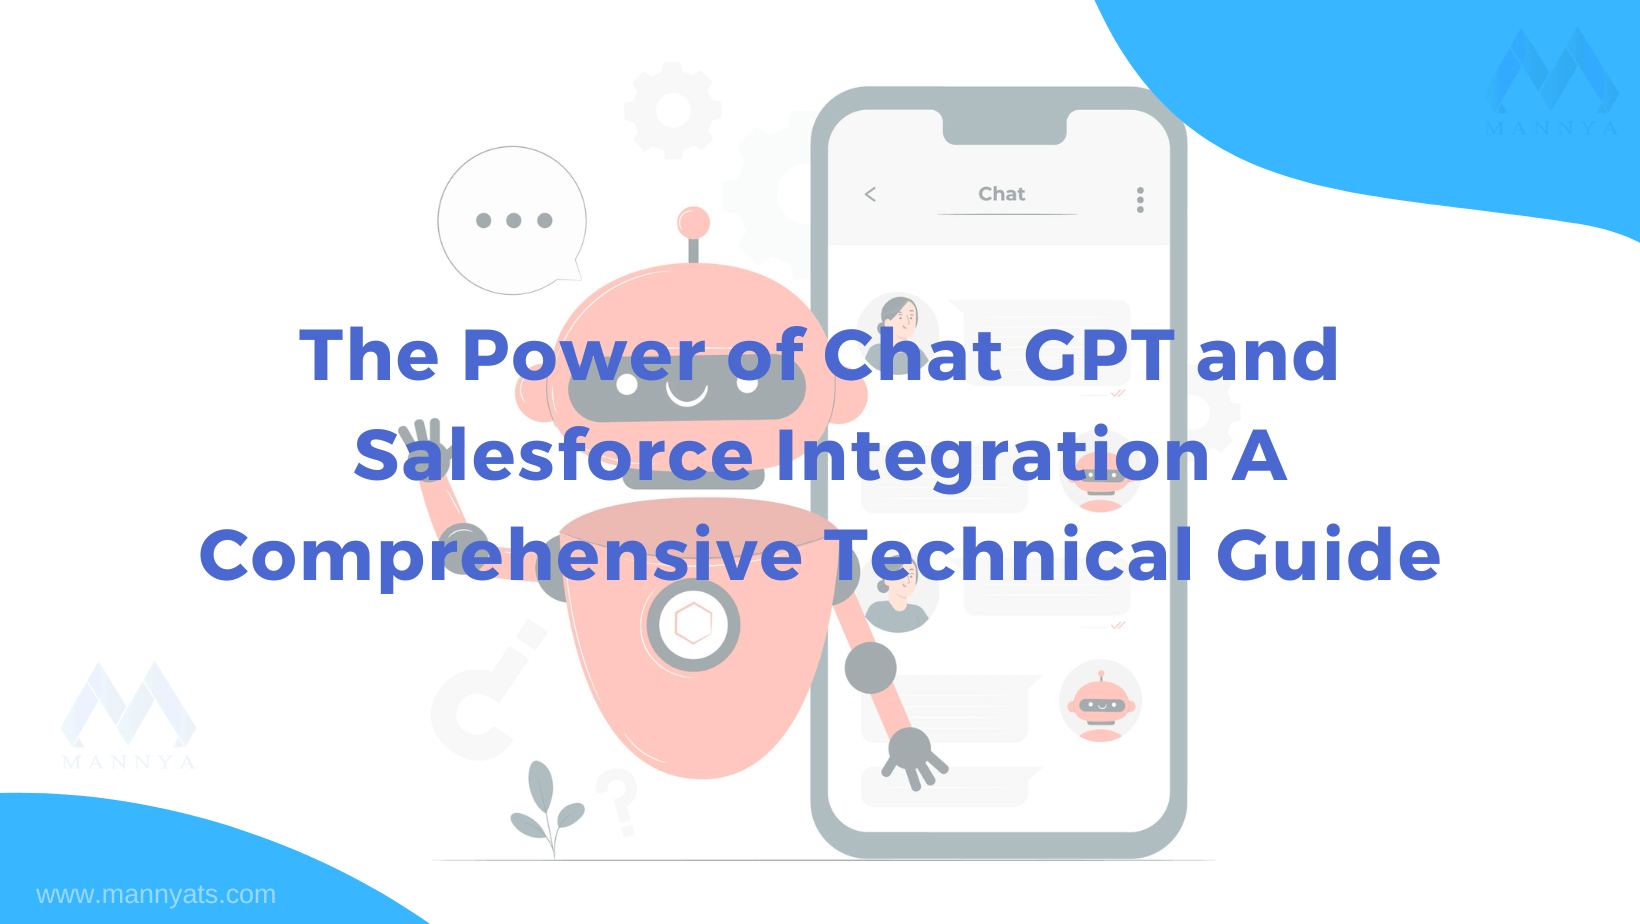 The Power of Chat GPT and Salesforce Integration A Comprehensive Technical Guide